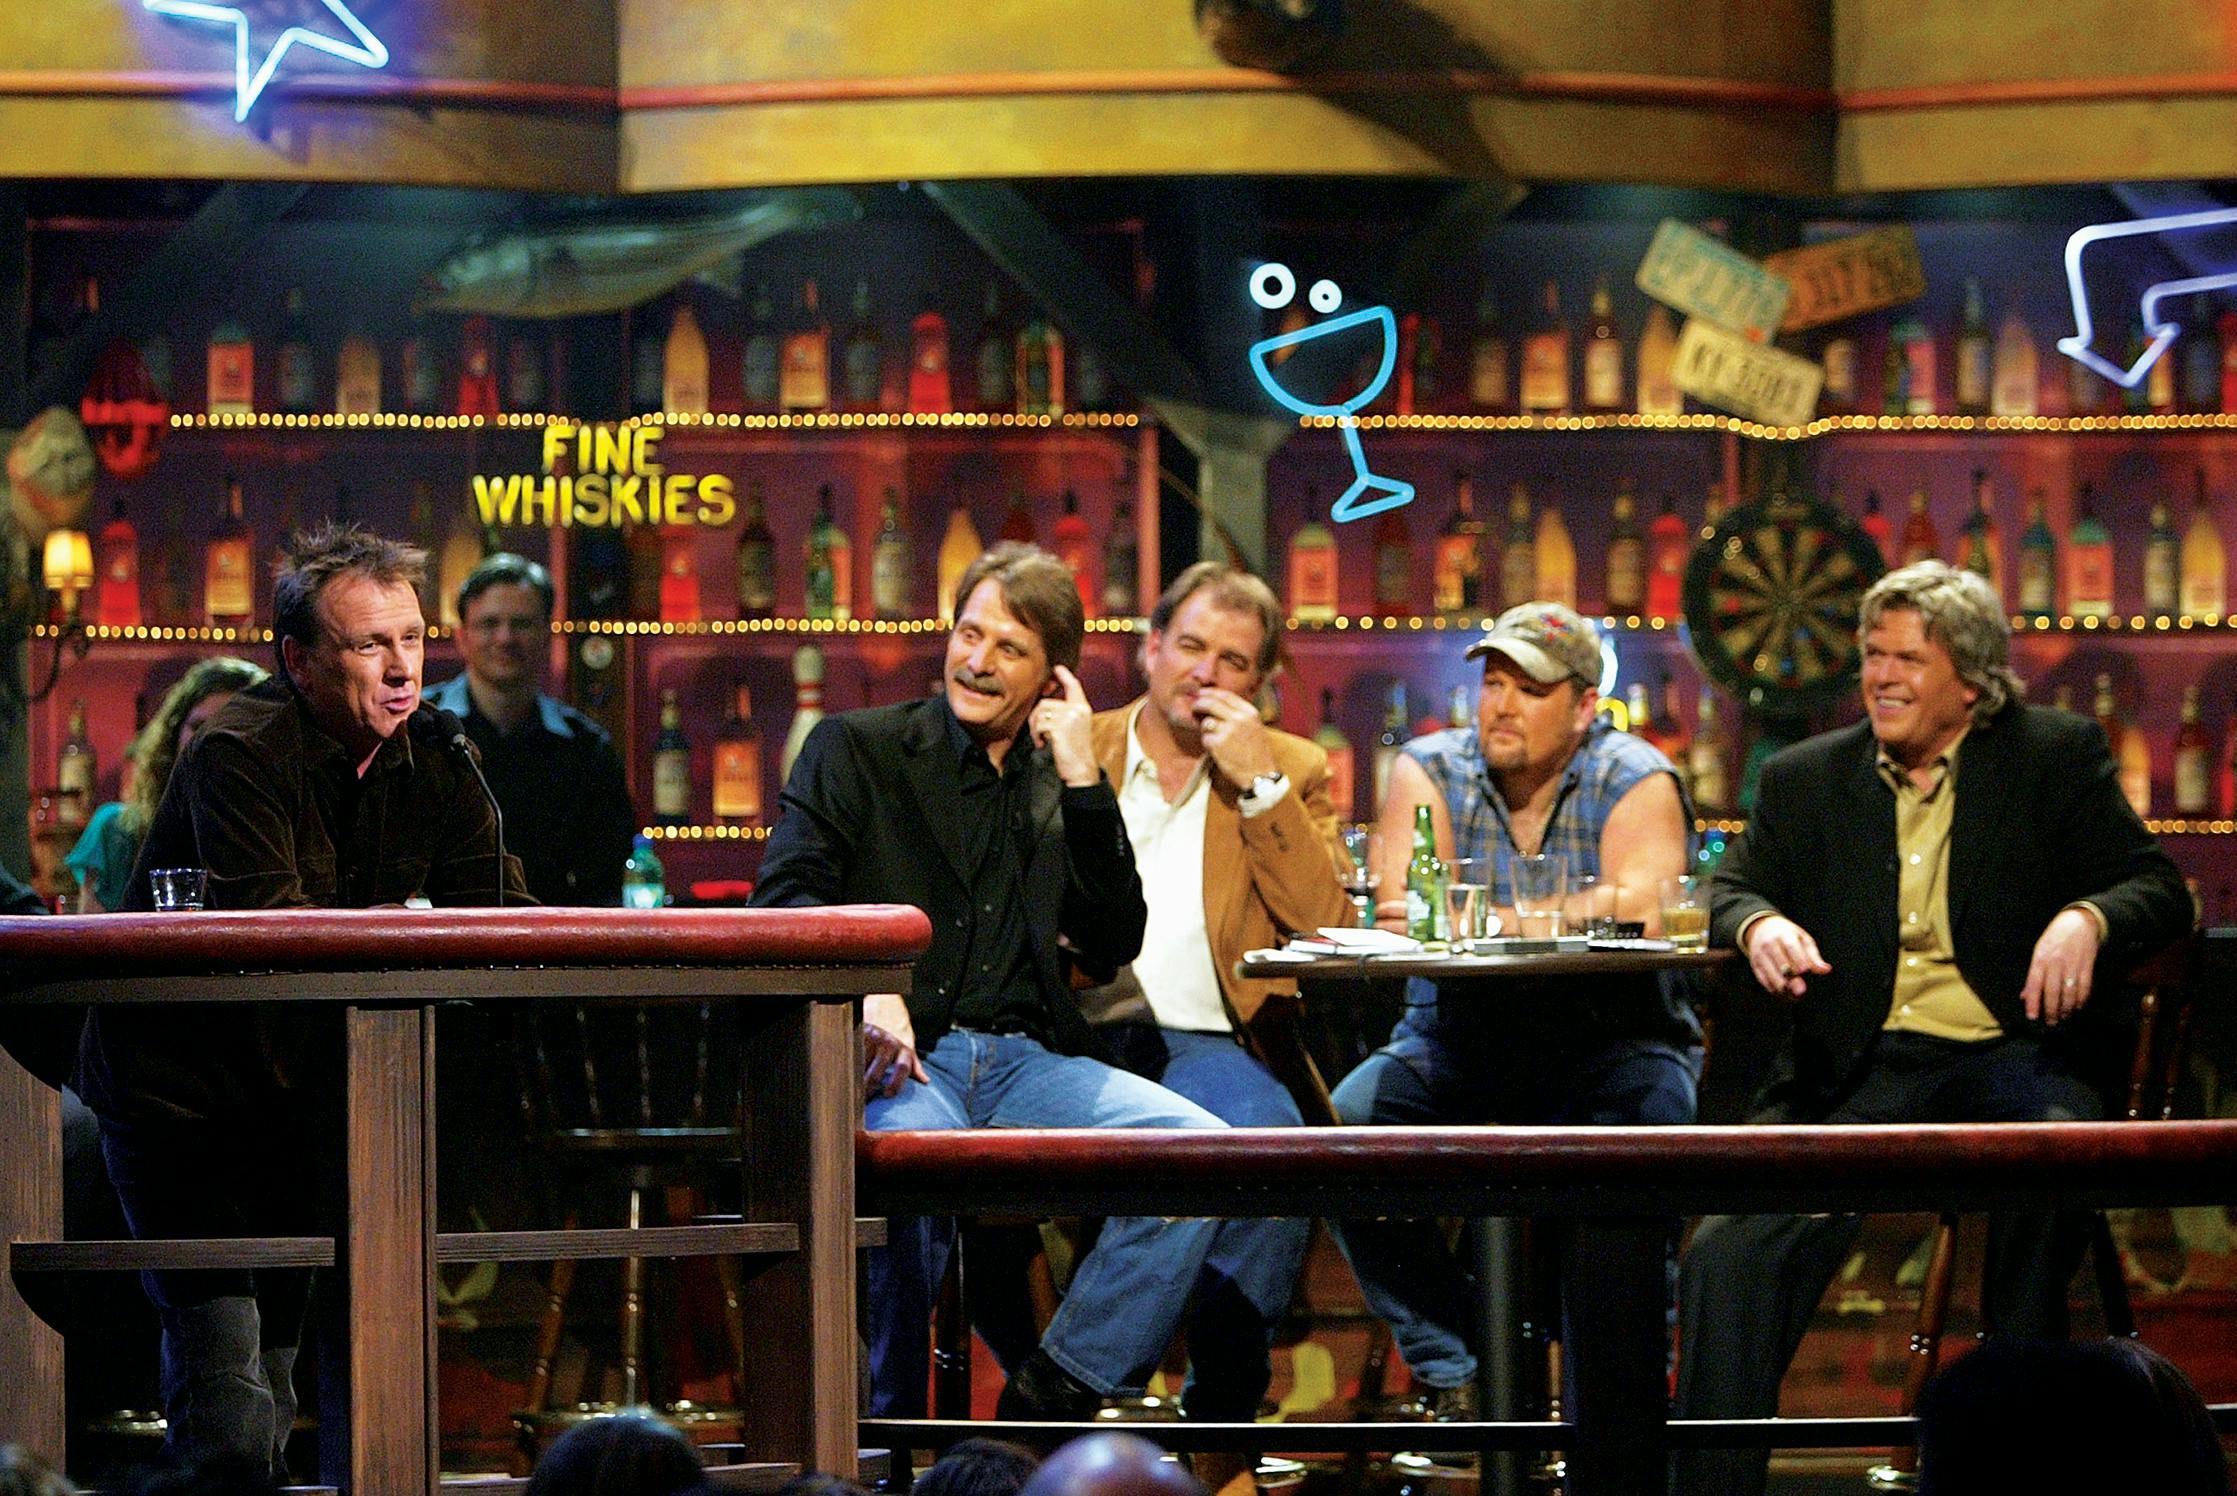 Foxworthy, Bill Engvall, Larry the Cable Guy, and White watching as Colin Quinn performs at a roast in 2004.